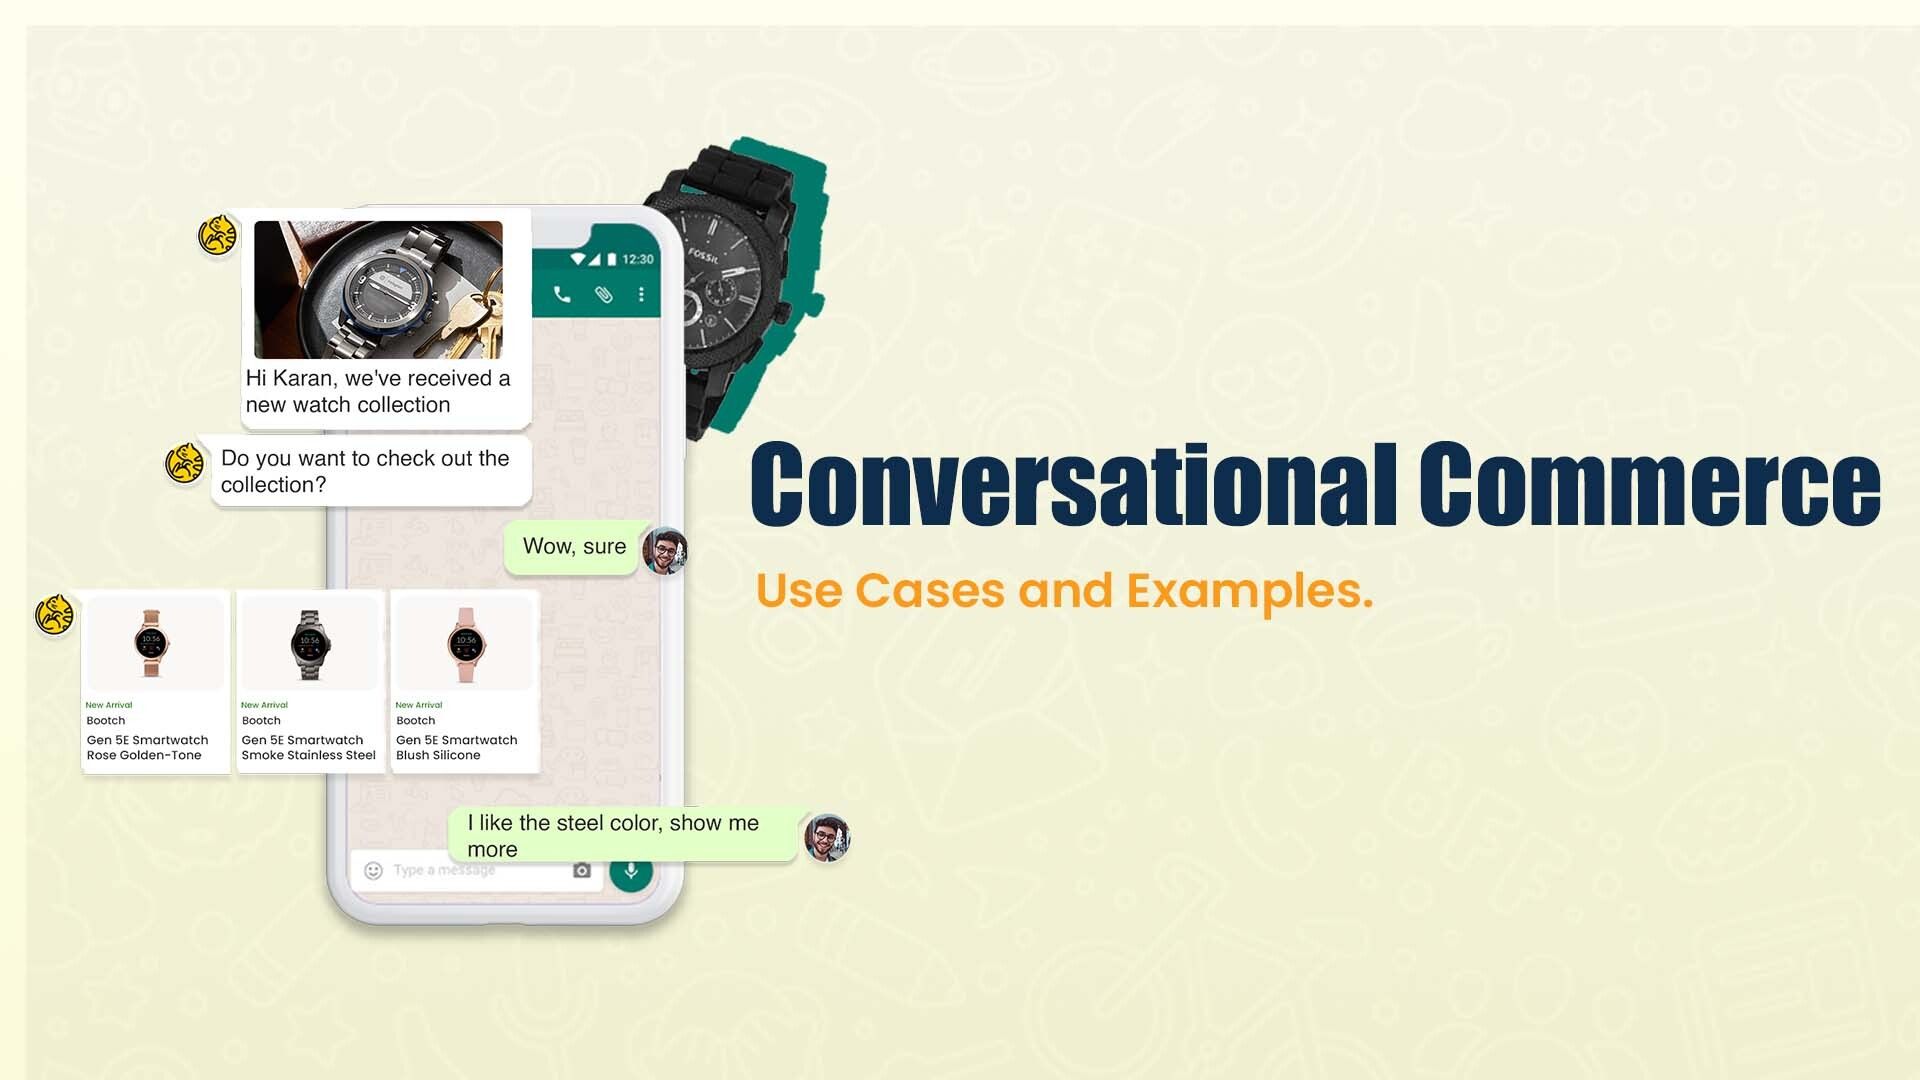 Conversational Commerce: Use Cases and Examples